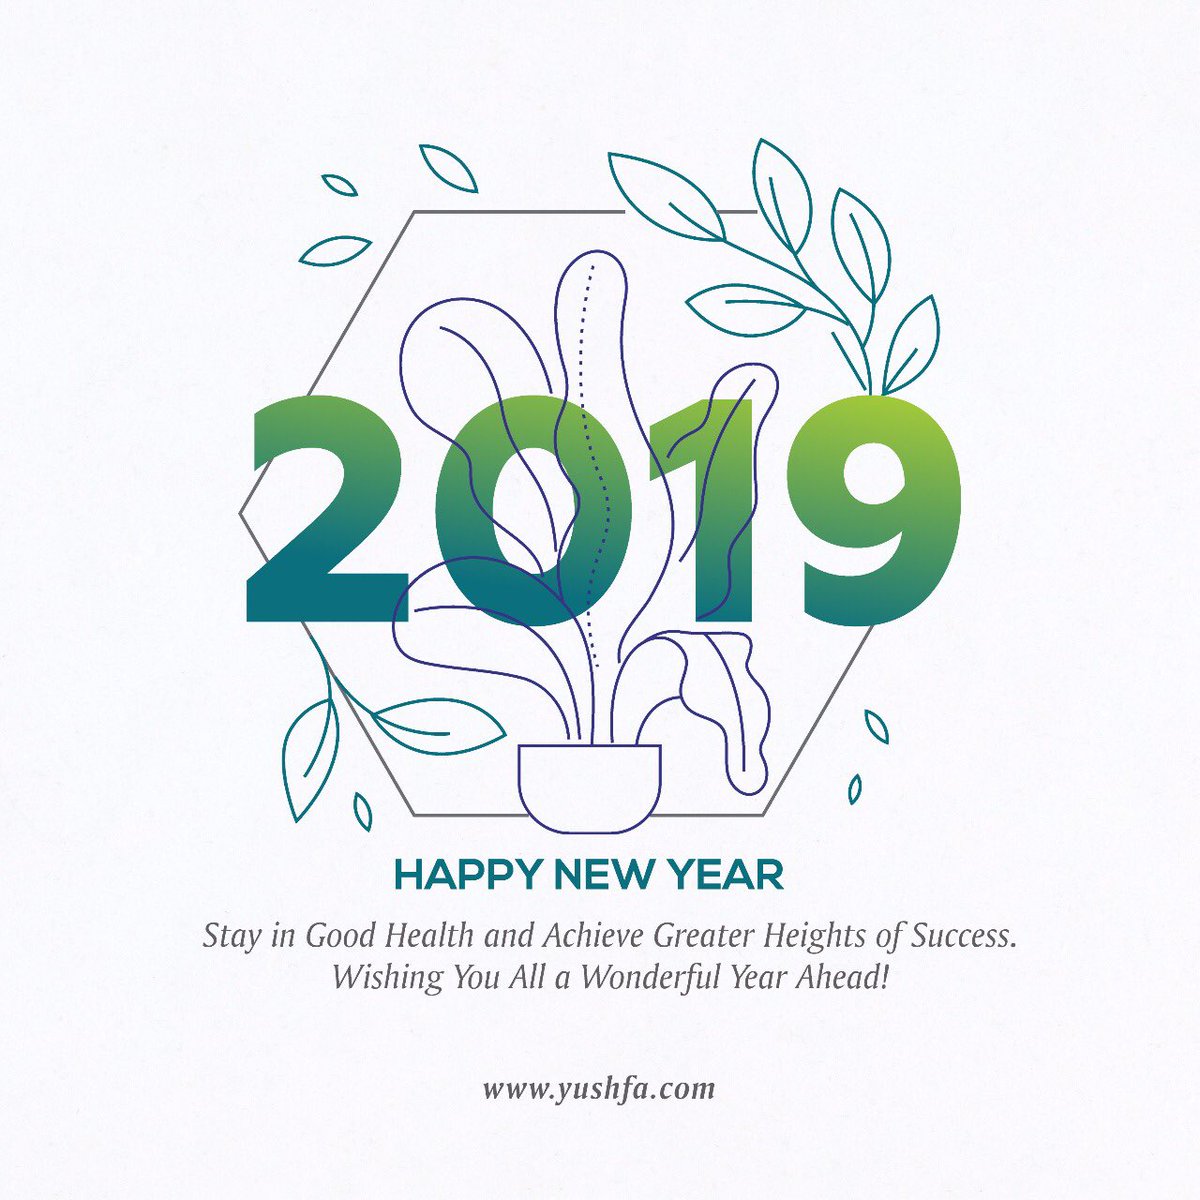 YushfaHerbals Family wishes everyone a very happy, prosperous and ‘fit’ New Year 2019. Don’t forget to call, text or whatsapp us at 9212660583 for any type of consultation. #YushfaHerbals serving since 1941. #HappyNewYear #Happy2019 #Happy_New_Year_2019 #Happy_New_Year